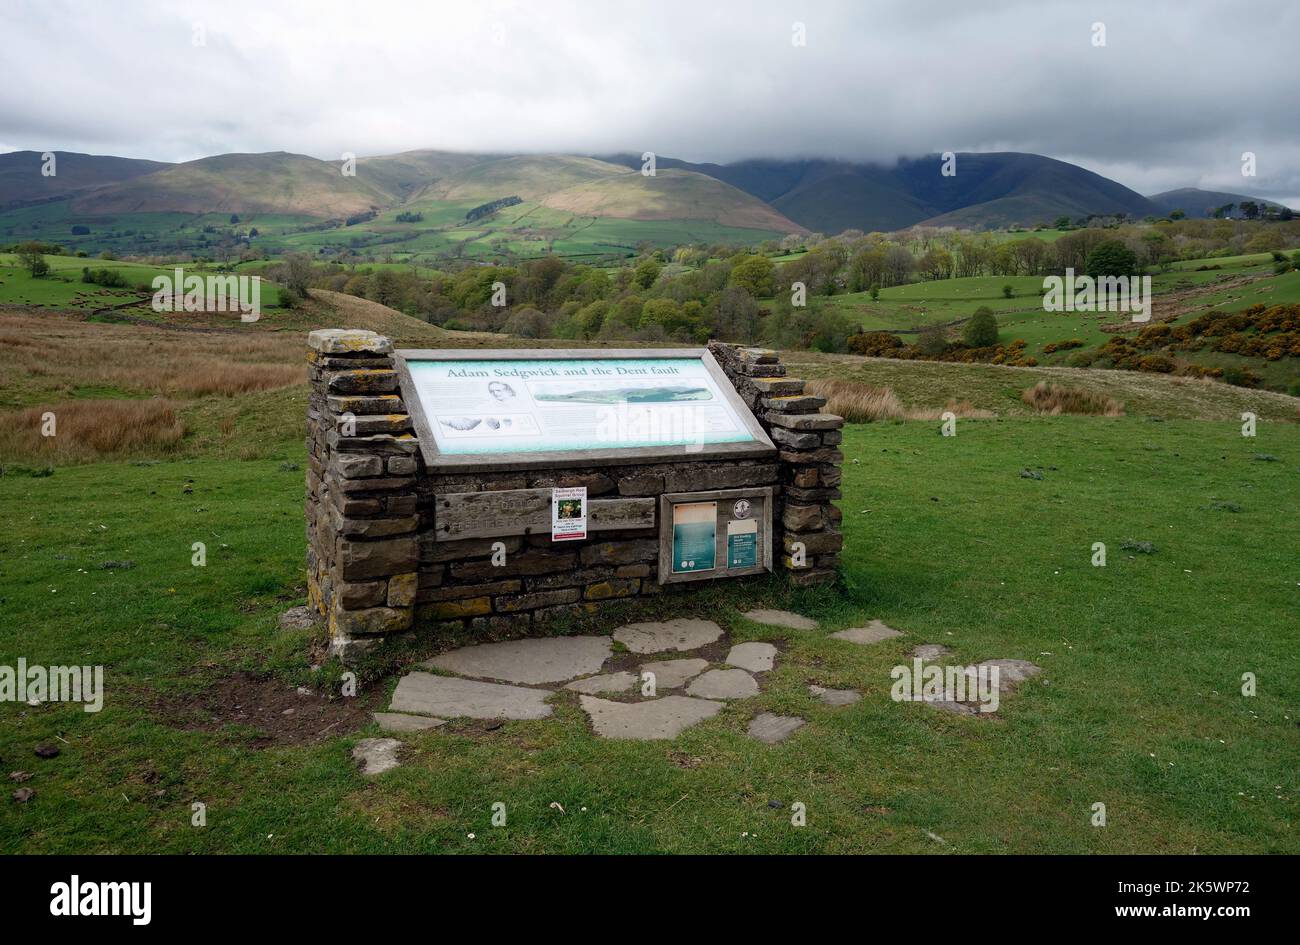 Stone information Board for the Adam Sedgwick Geological Trail from the car Park on the High point of the A684 Garsdale Road in the Yorkshire Dales, Banque D'Images